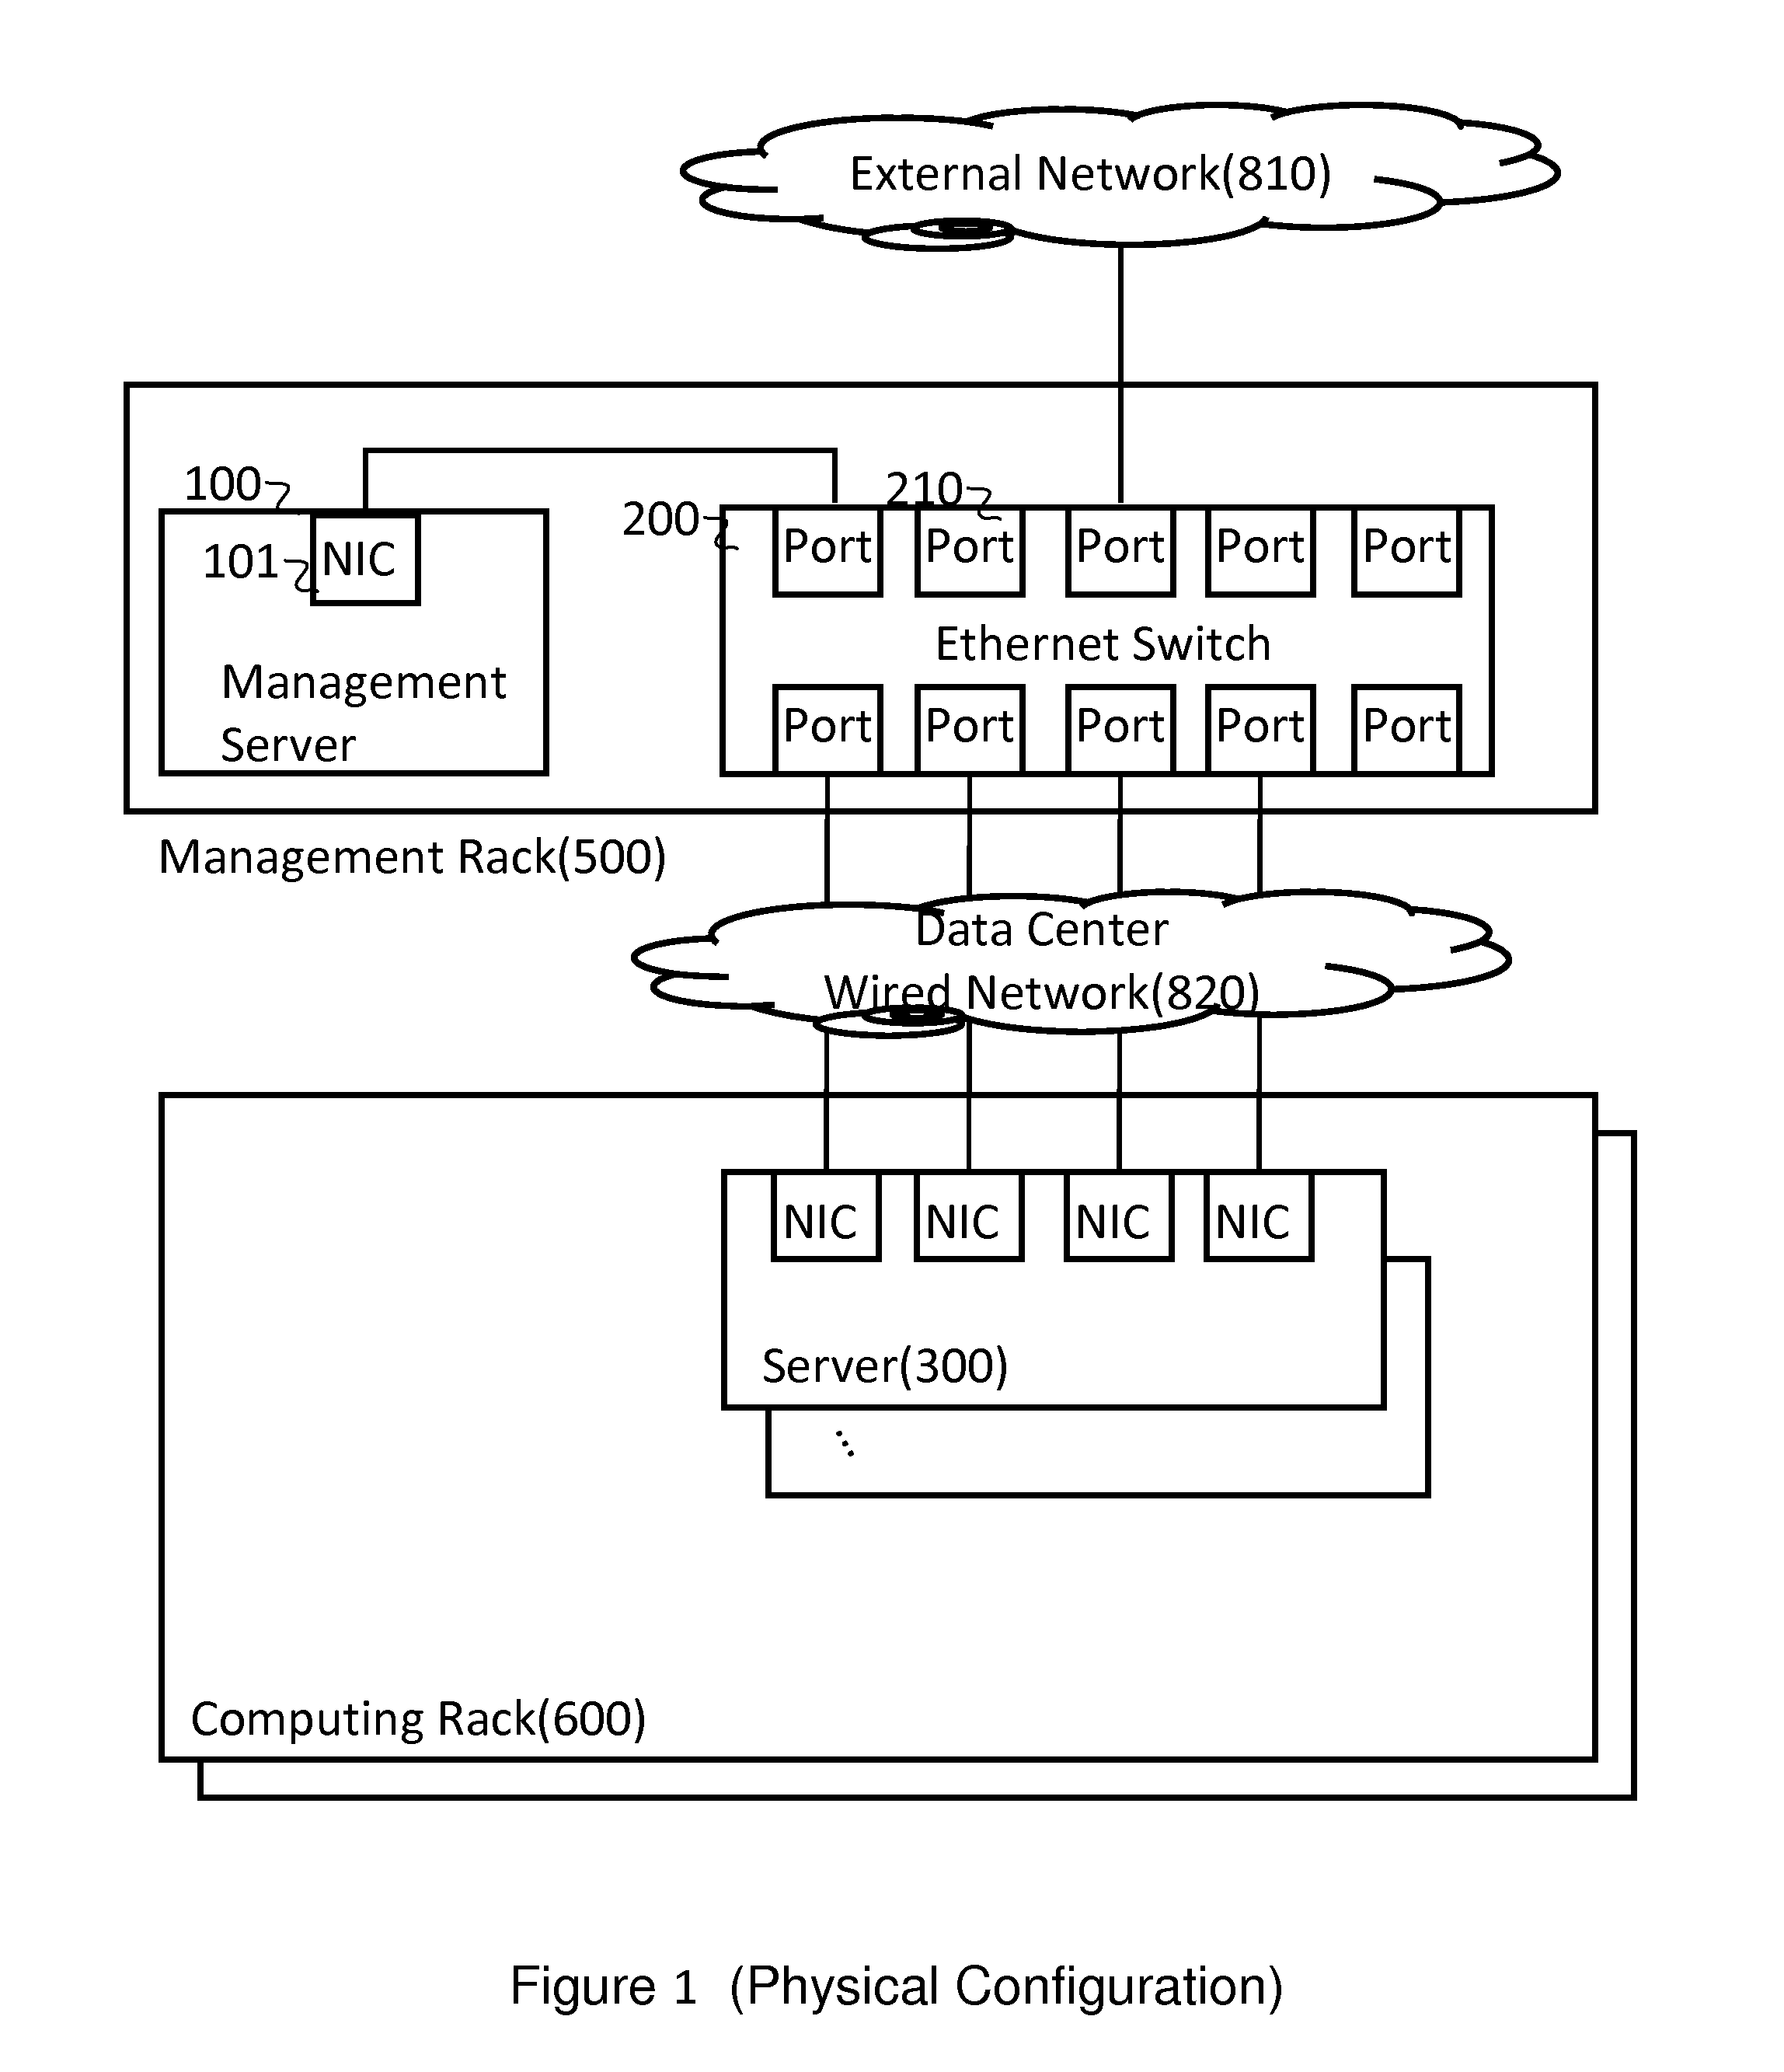 Method and apparatus of connectivity discovery between network switch and server based on VLAN identifiers